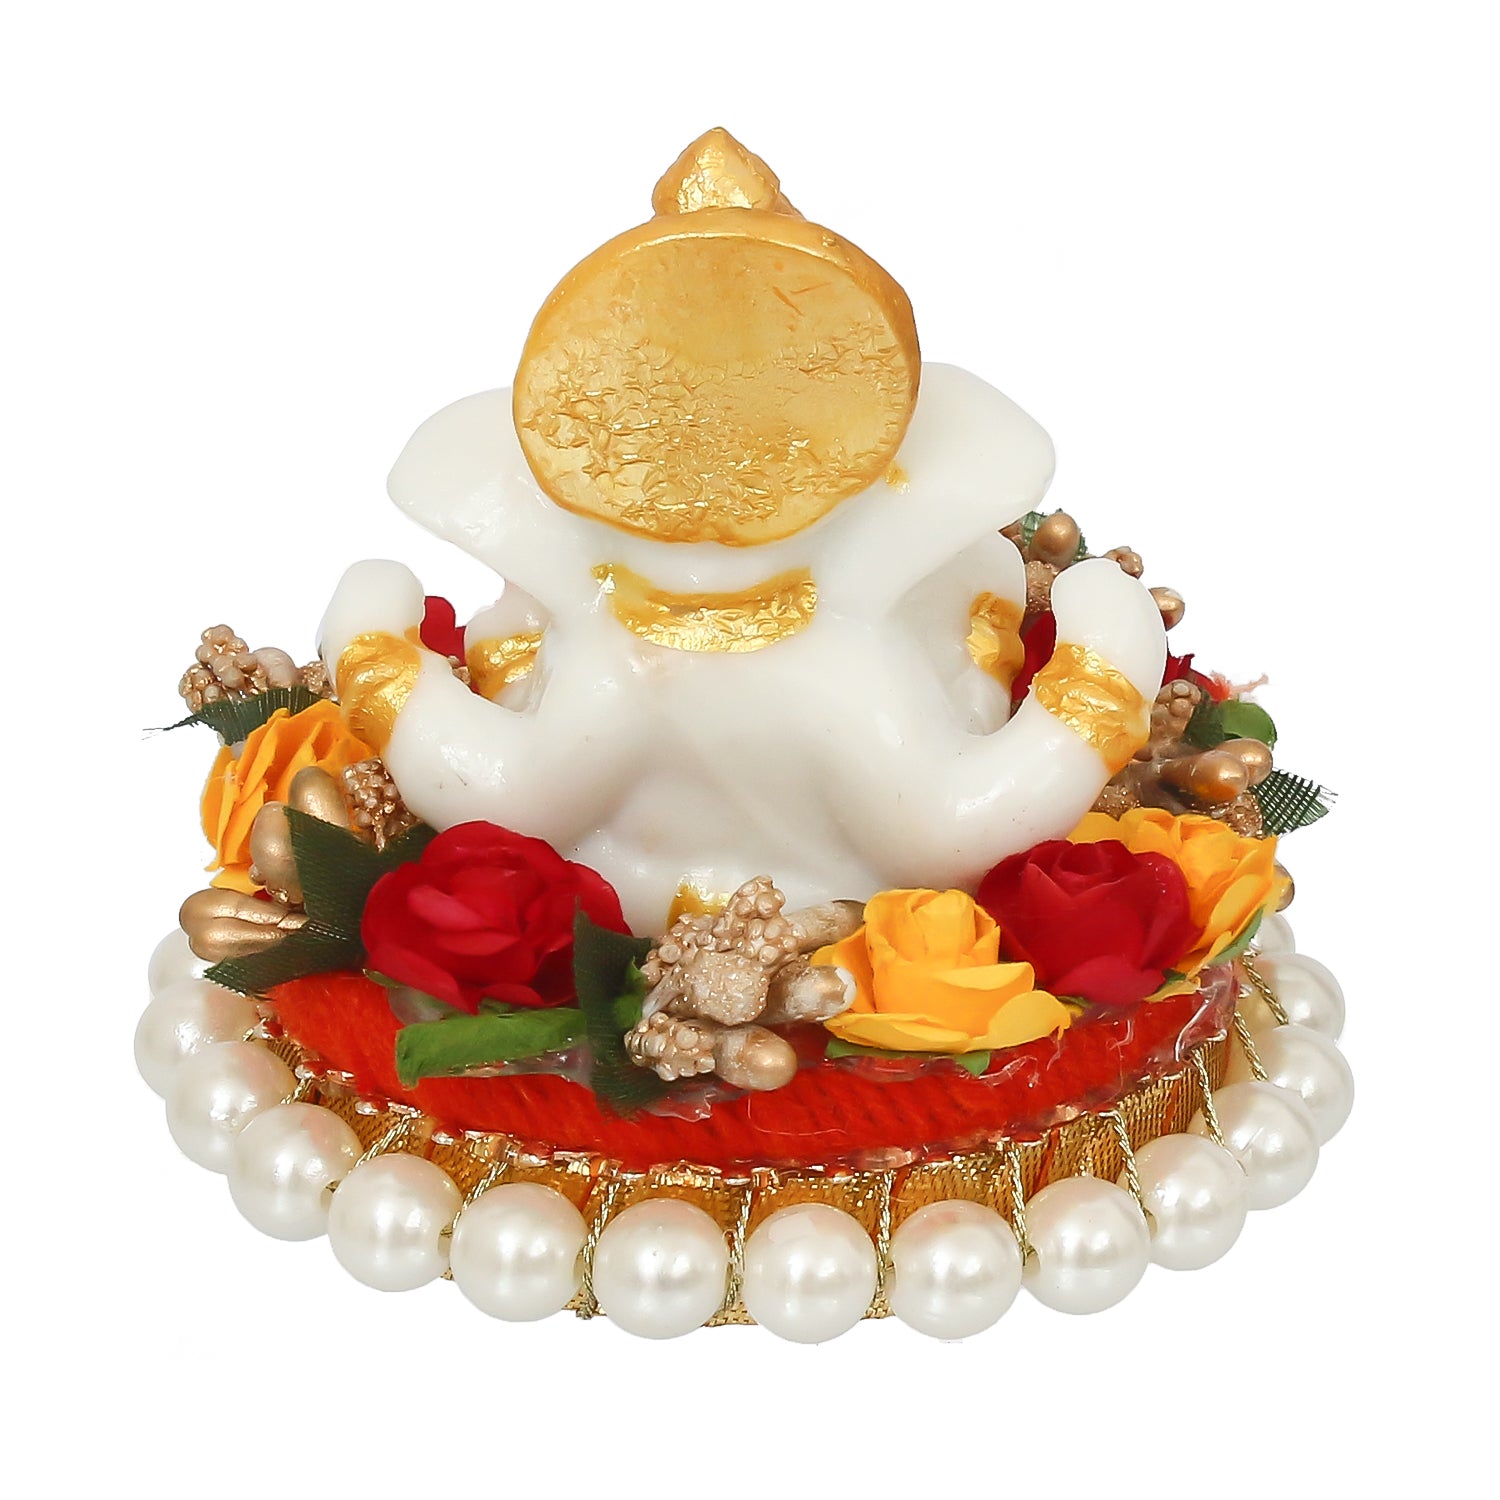 Polyresin Lord Ganesha Statue on Decorative Handcrafted Plate for Home, Office and Car Dashboard 8